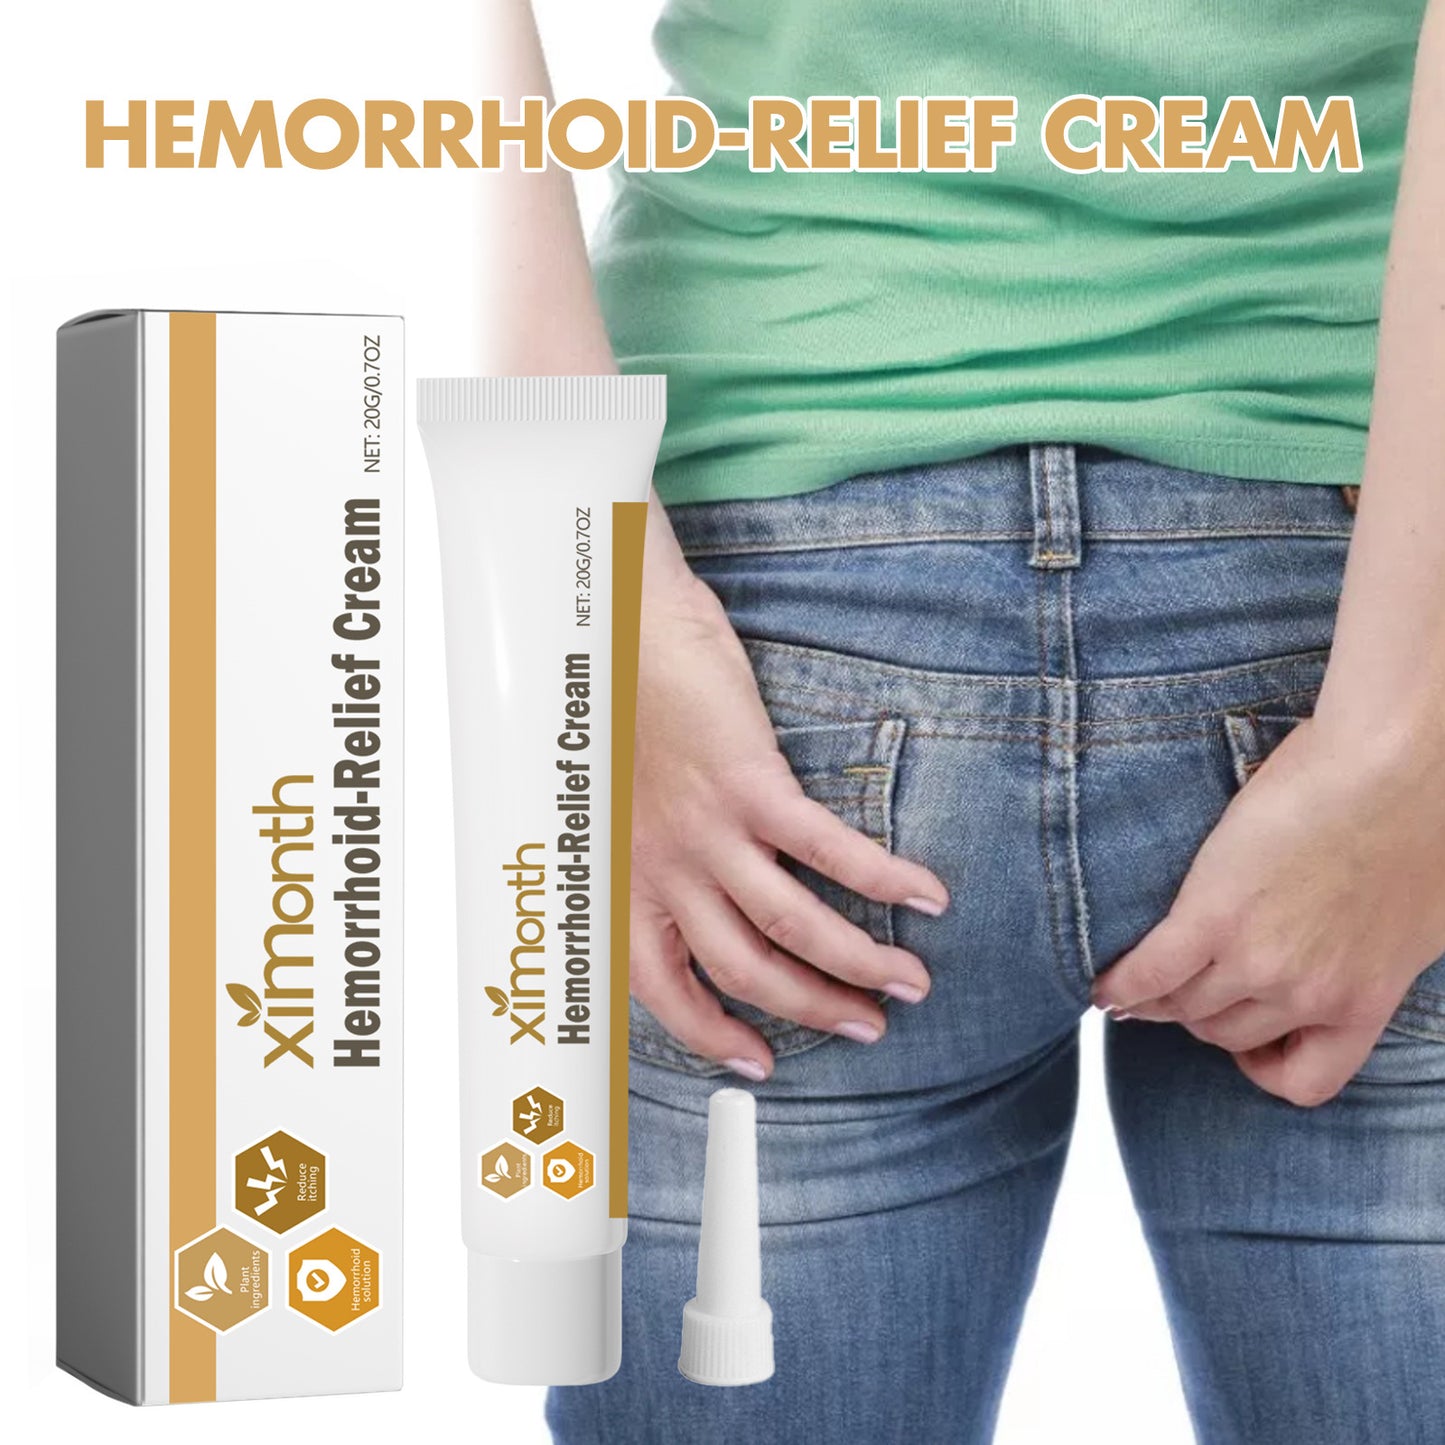 Relieve Itching And Discomfort Repair Inner And Outer Hemorrhoids Repairing Cream